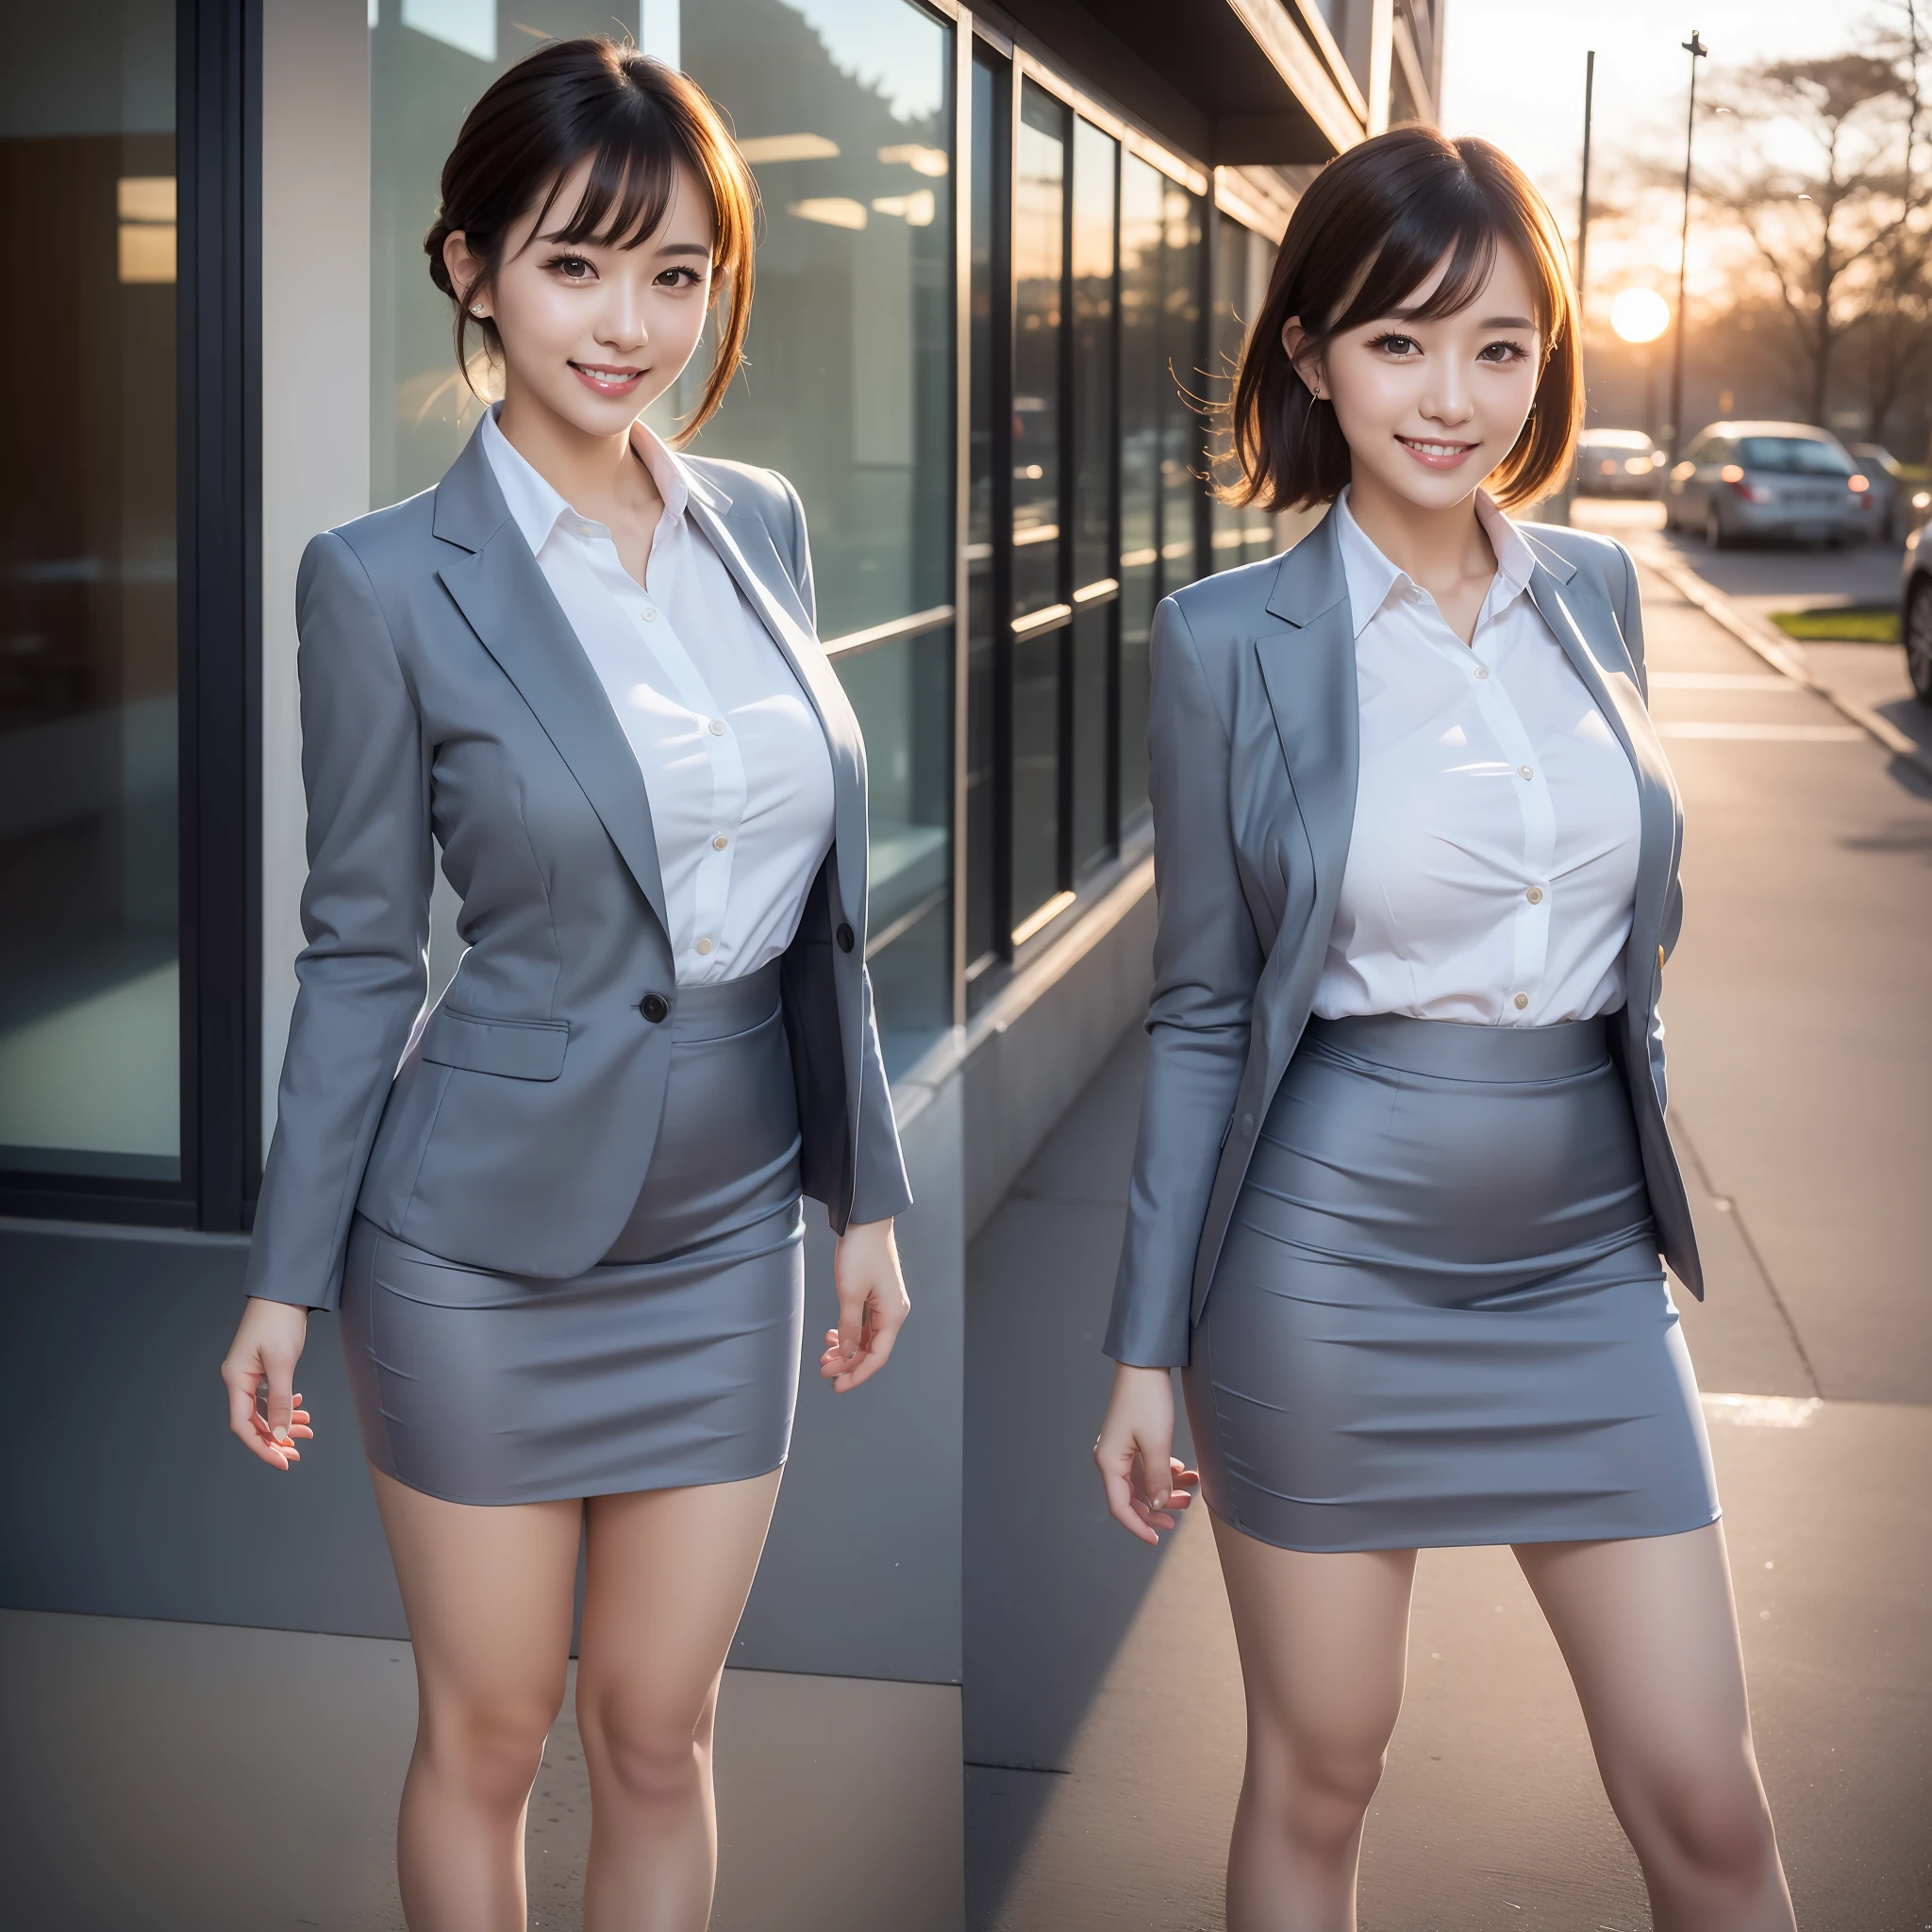 (realistic, photo-realistic:1.37), (masterpiece), (best quality:1.4), (ultra high res:1.2),(RAW photo:1.2), (sharp focus:1.3), (face focus:1.2), elegant, (full body:1.2), (1 girl wearing detailed pencil-skirt and suit-jacket:1.3), (office lady), professionattire, high heels, (33yo:1.1), (happy smile:1.3), (shine hair:1.3), [ponytail], BREAK,
(huge breast), scenery, (Beautiful Sunset background:1.2), from behind, backshot, bangs, beautiful detailed eyes, looking at viewer, (cute), (no makeup),
+LoRA